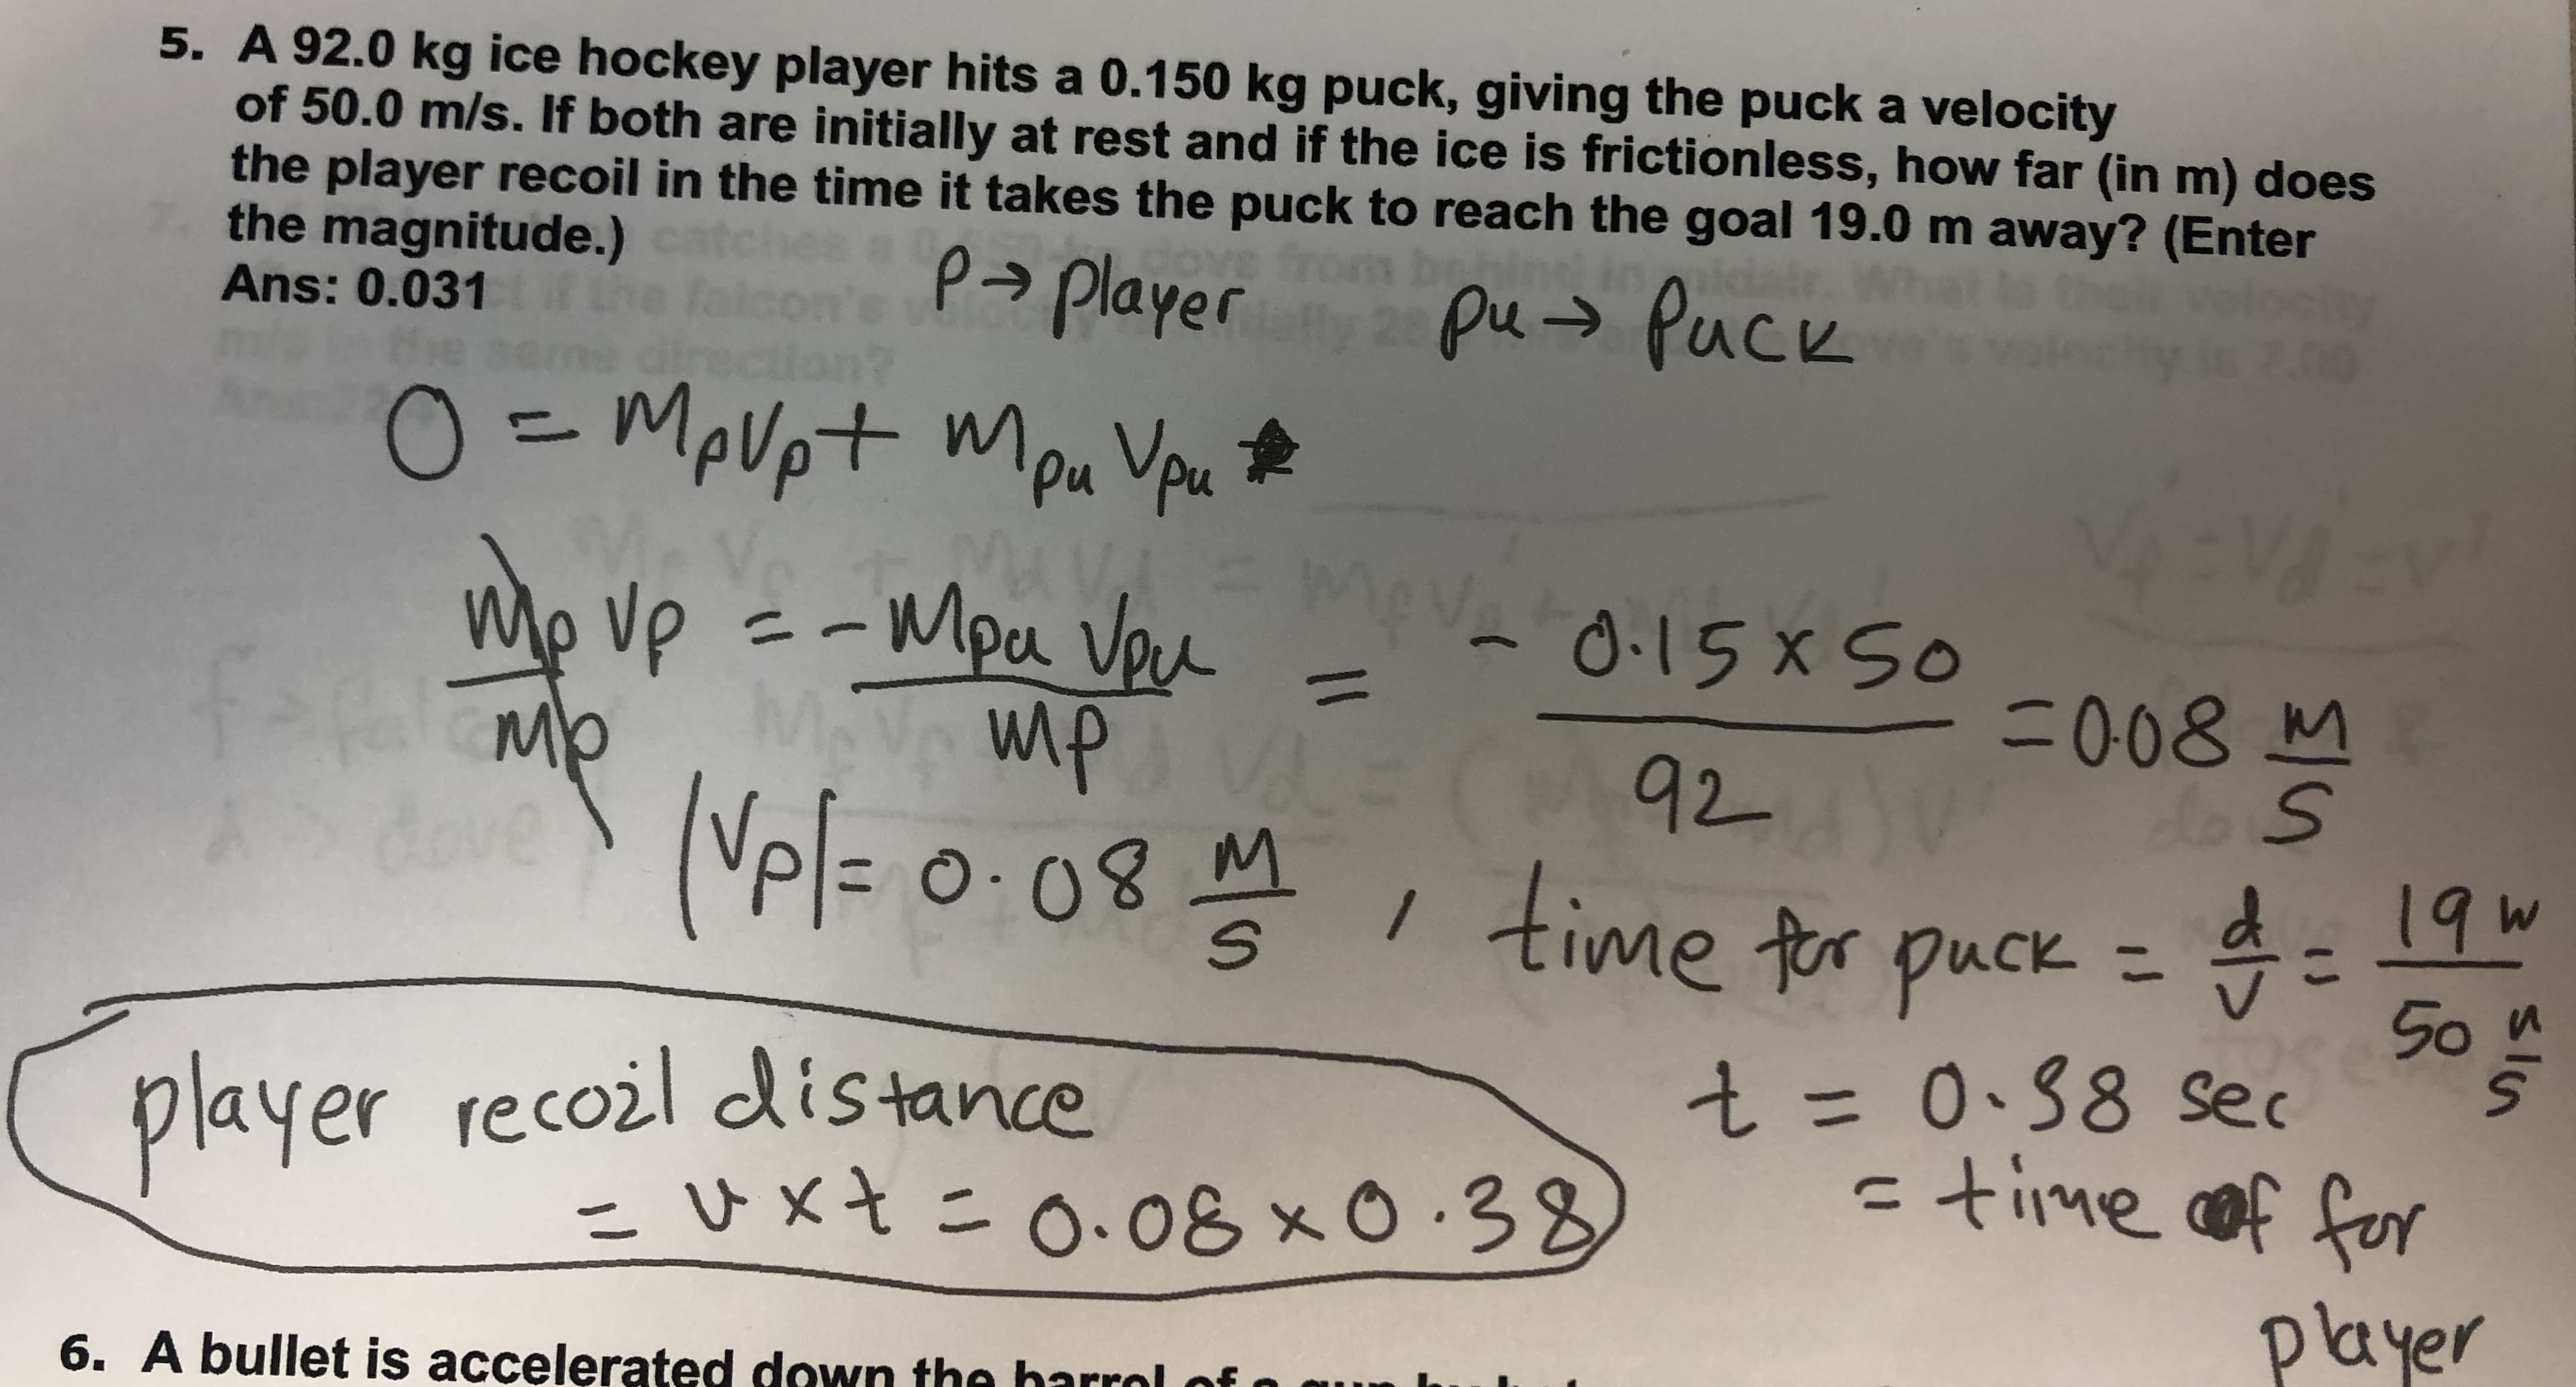 5. A 92.0 kg ice hockey player hits a 0.150 kg puck, giving the puck a velocity
of 50.0 m/s. If both are initially at rest and if the ice is frictionless, how far (in m) does
the player recoil in the time it takes the puck to reach the goal 19.0 m away? (Enter
the magnitude.)
Ans: 0.031irth
rom
behine
p> player pu → Puck
O-MoVpt Mpu Vpu t*
Mo ve =-Mpa Vou
Mev
- Μpu ν
0.15x So
%3D
F008
Mb
doveNel= 0:08M time tor puck =
92V
19W
50
player
recoil distance
こUxtニo、08x0.38
%3D
ctime cof fer
player
6. A bullet is accelerated down the harrol of
3151n
